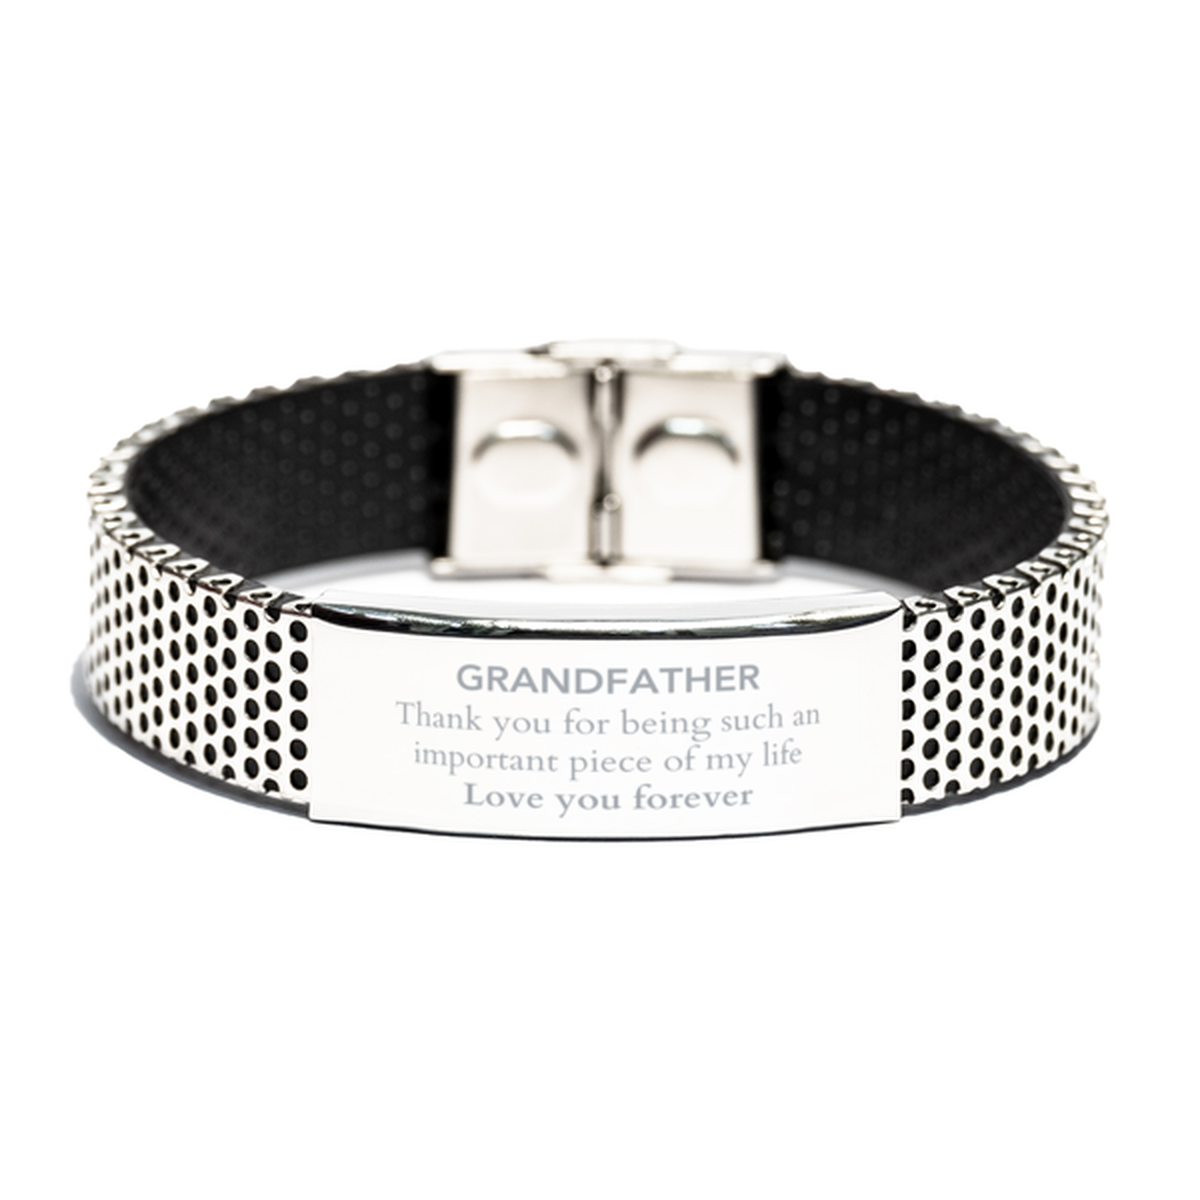 Appropriate Grandfather Stainless Steel Bracelet Epic Birthday Gifts for Grandfather Thank you for being such an important piece of my life Grandfather Christmas Mothers Fathers Day